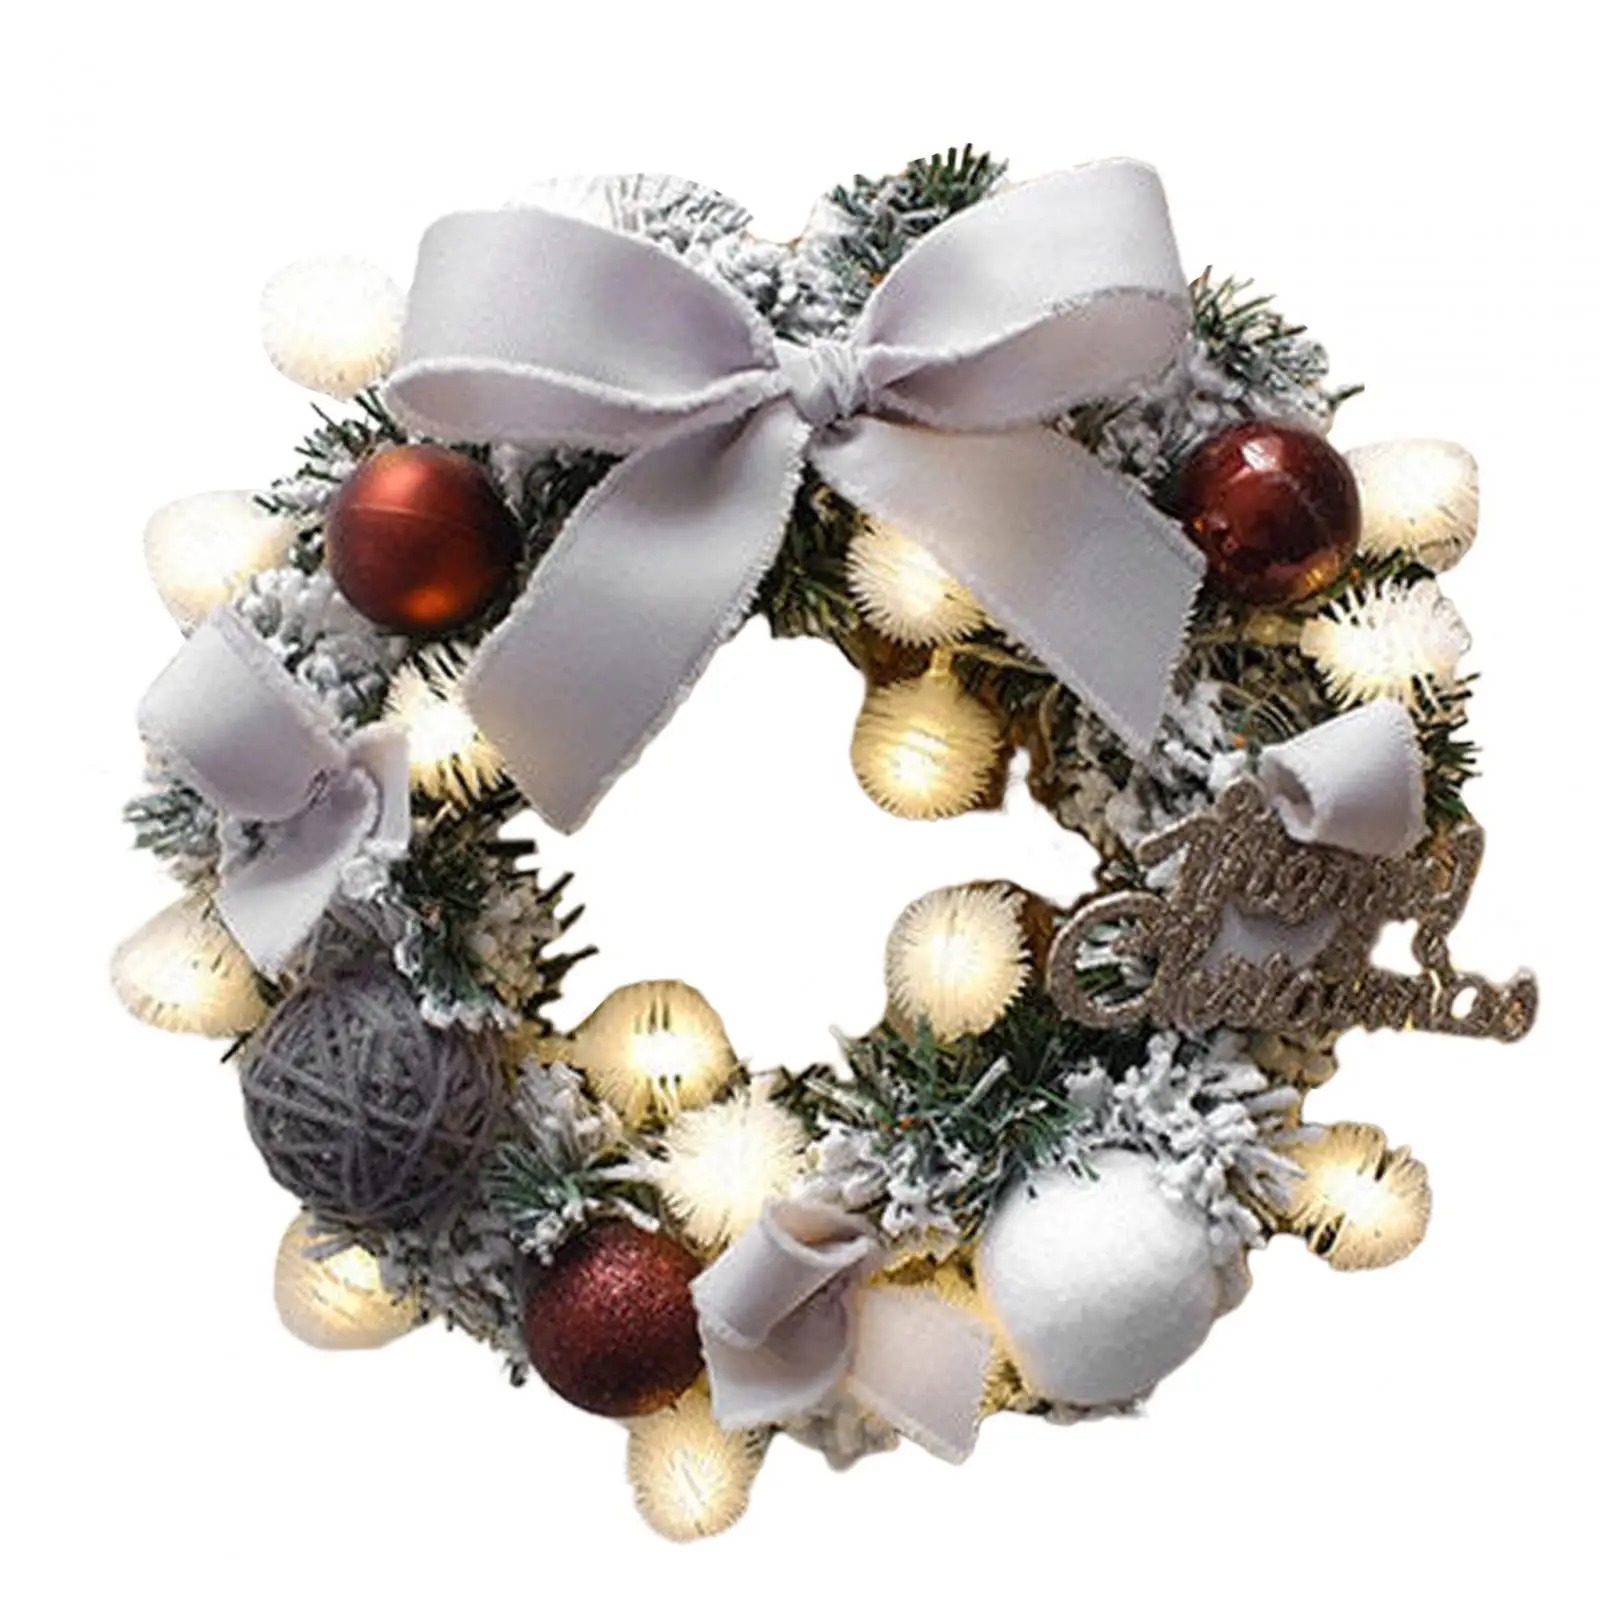 Artificial Christmas Wreath with String Light Decor Indoor Outdoor Holiday Garland for Garden Balcony Hotel Living Room Festival